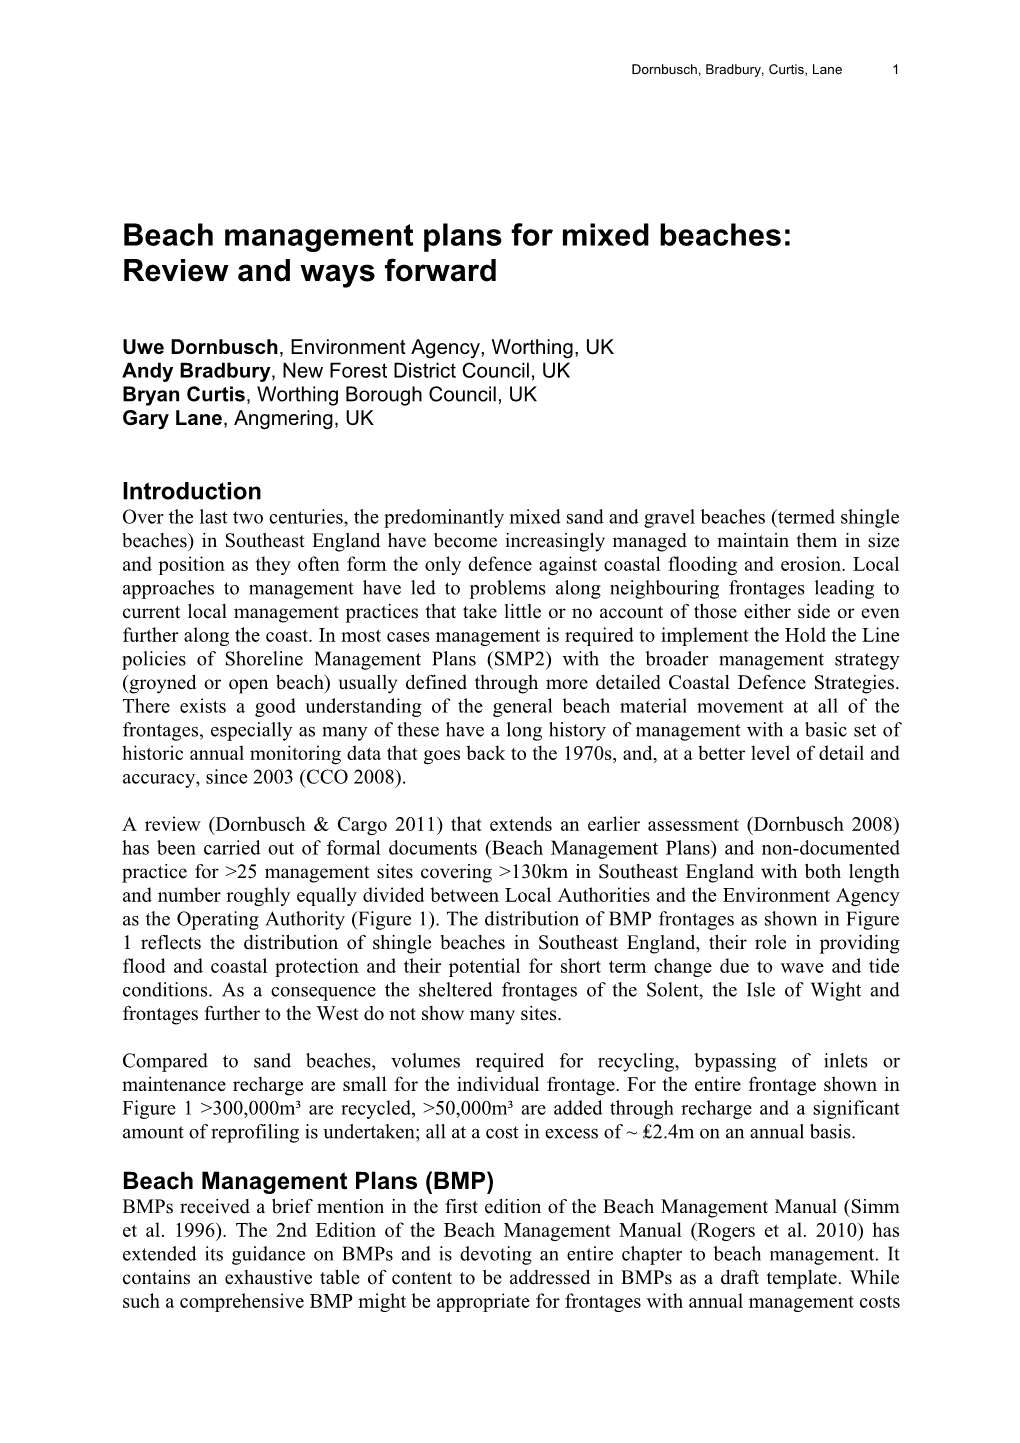 Beach Management Plans for Mixed Beaches: Review and Ways Forward